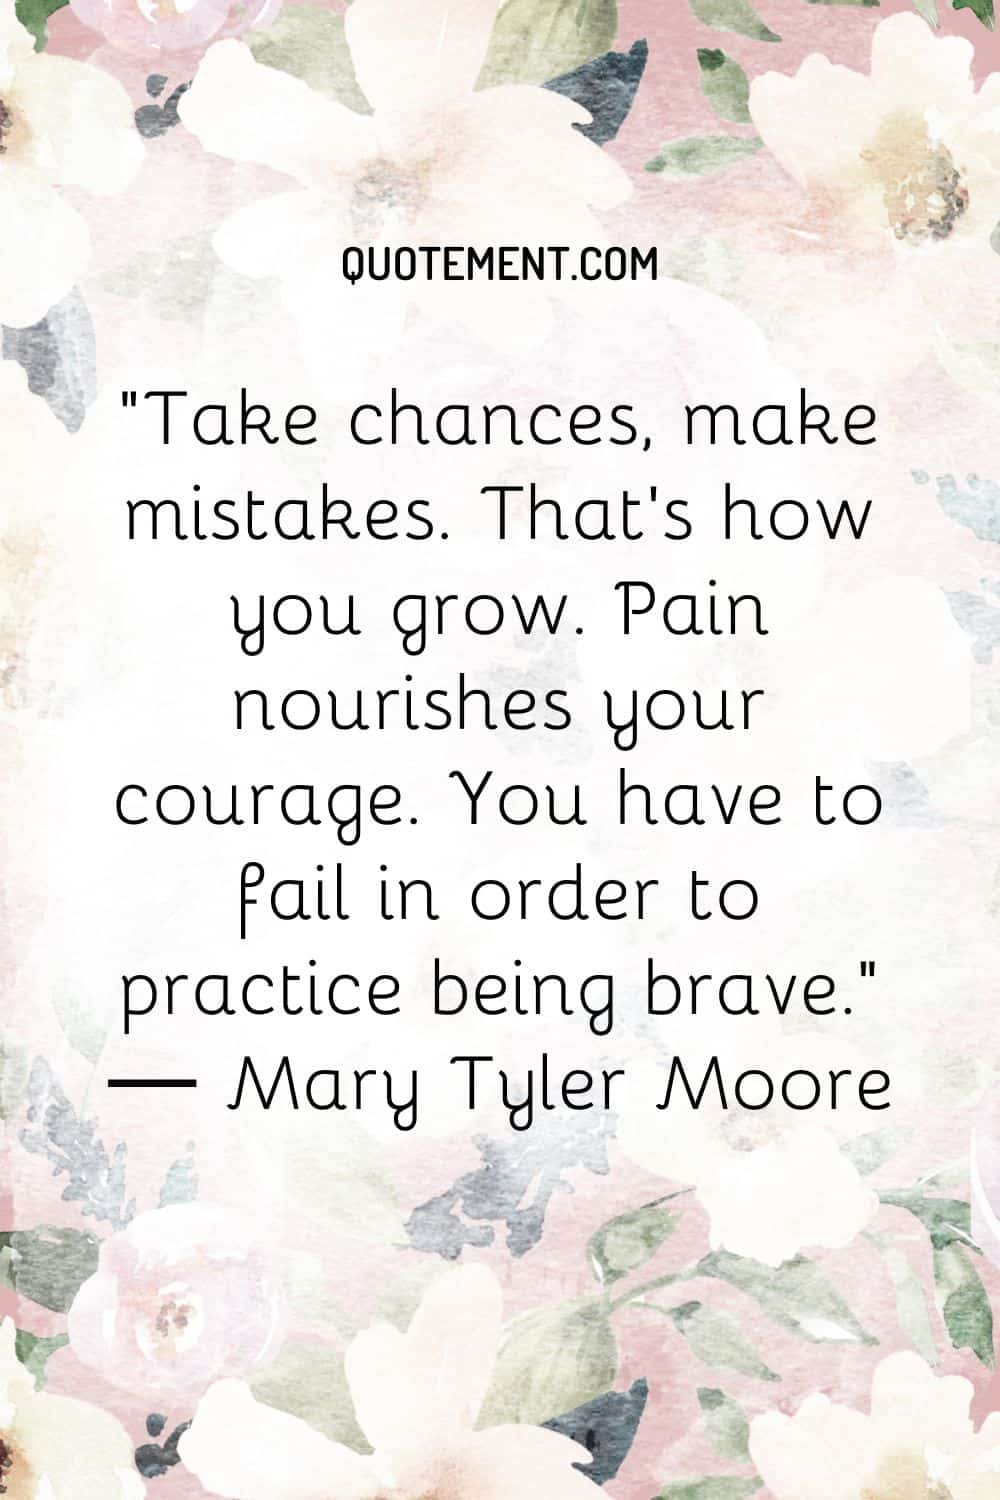 Take chances, make mistakes. That’s how you grow. Pain nourishes your courage.